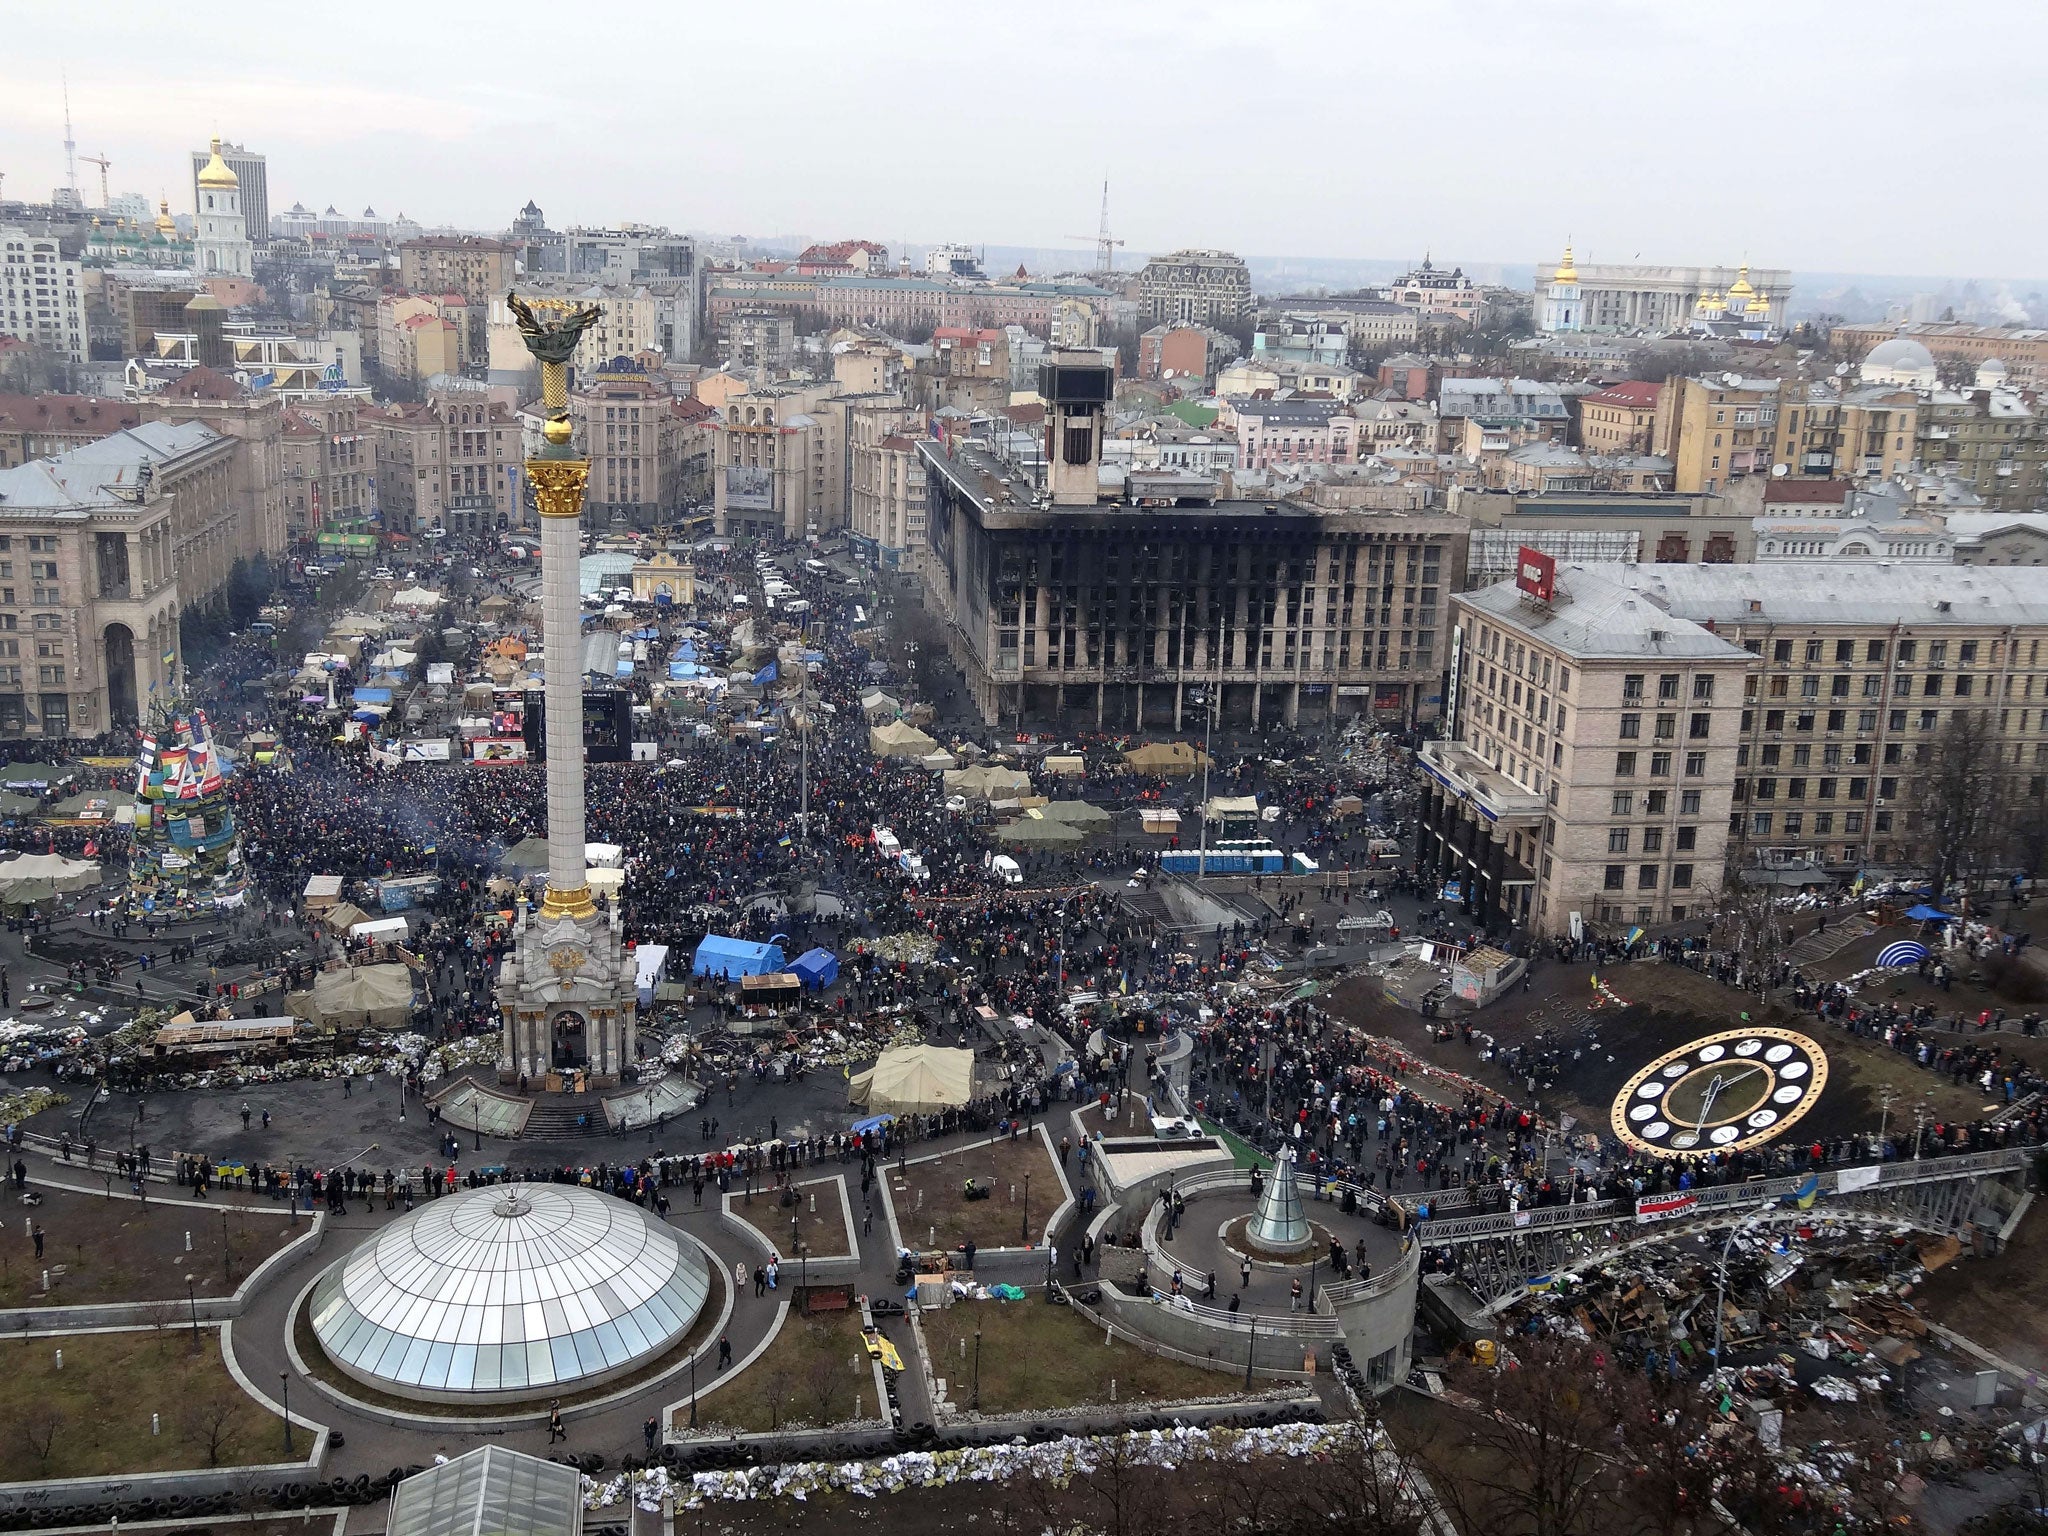 Kiev's Independence Square pictured on Sunday 23 February, where the shootings took place.